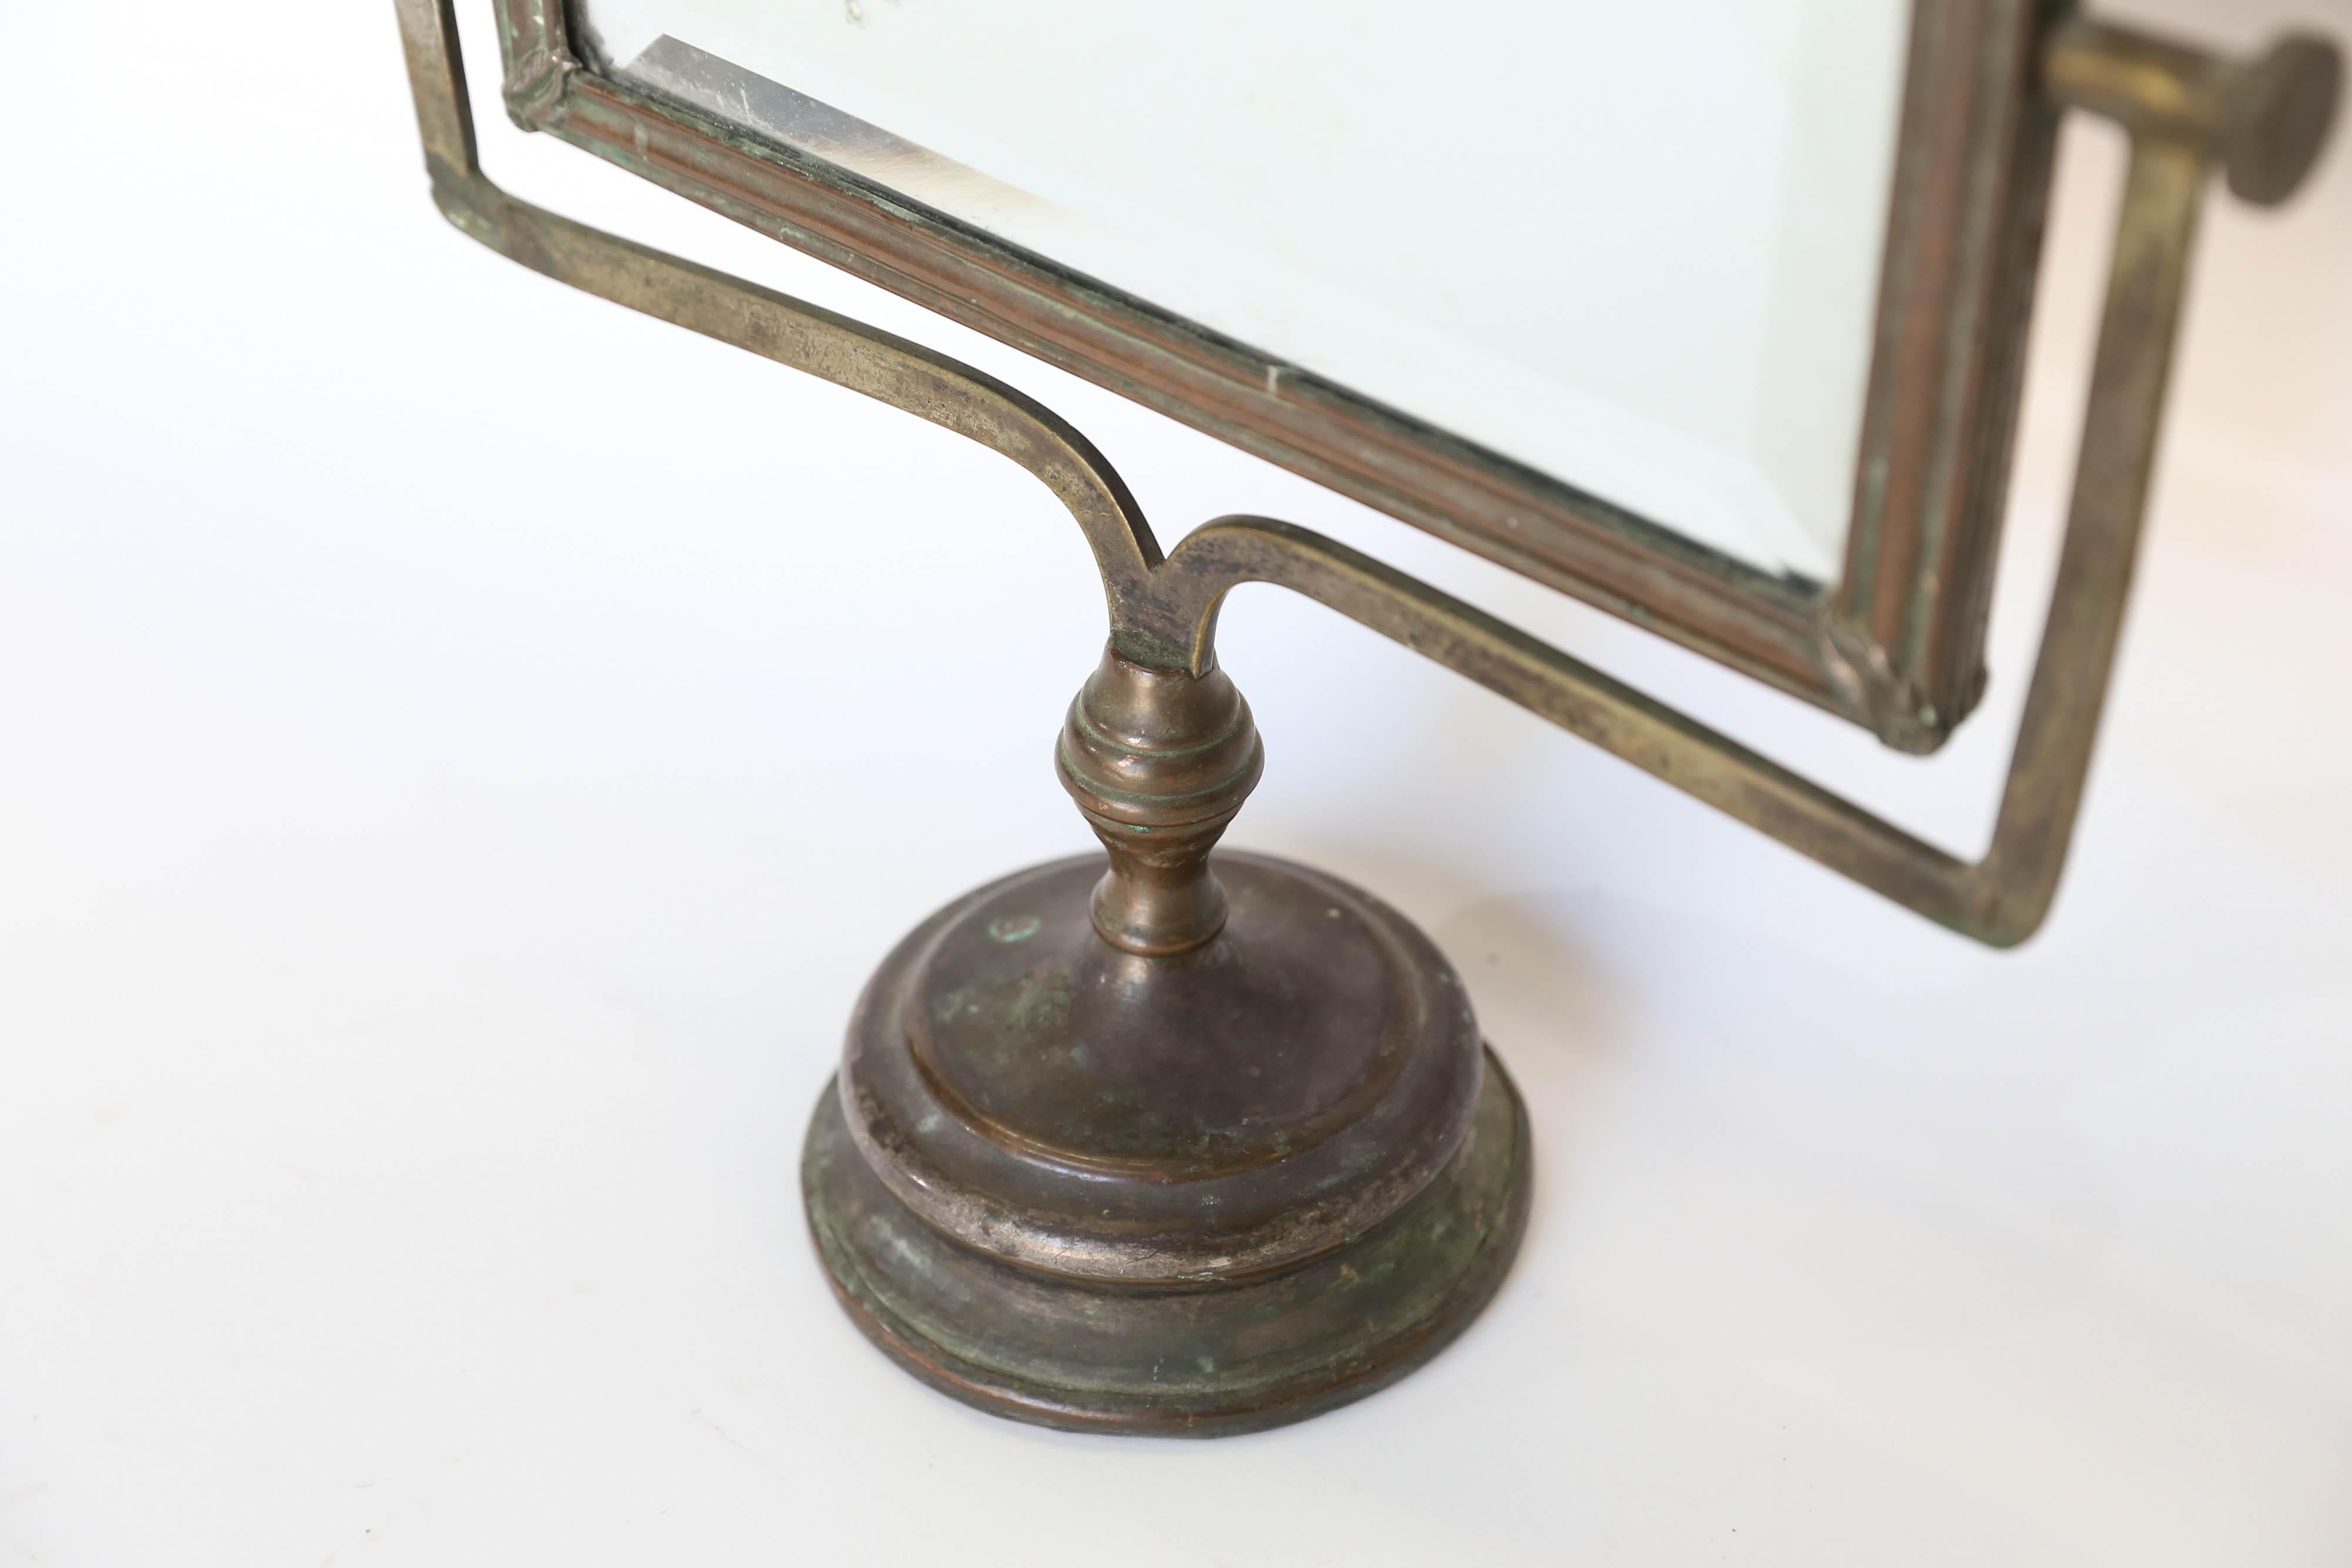 A lovely antique French shaving mirror. The beveled mirror is framed in copper and backed in wood and stands on a copper base measuring 4.5 inches in diameter. Perfect for your dressing area or a powder bath.